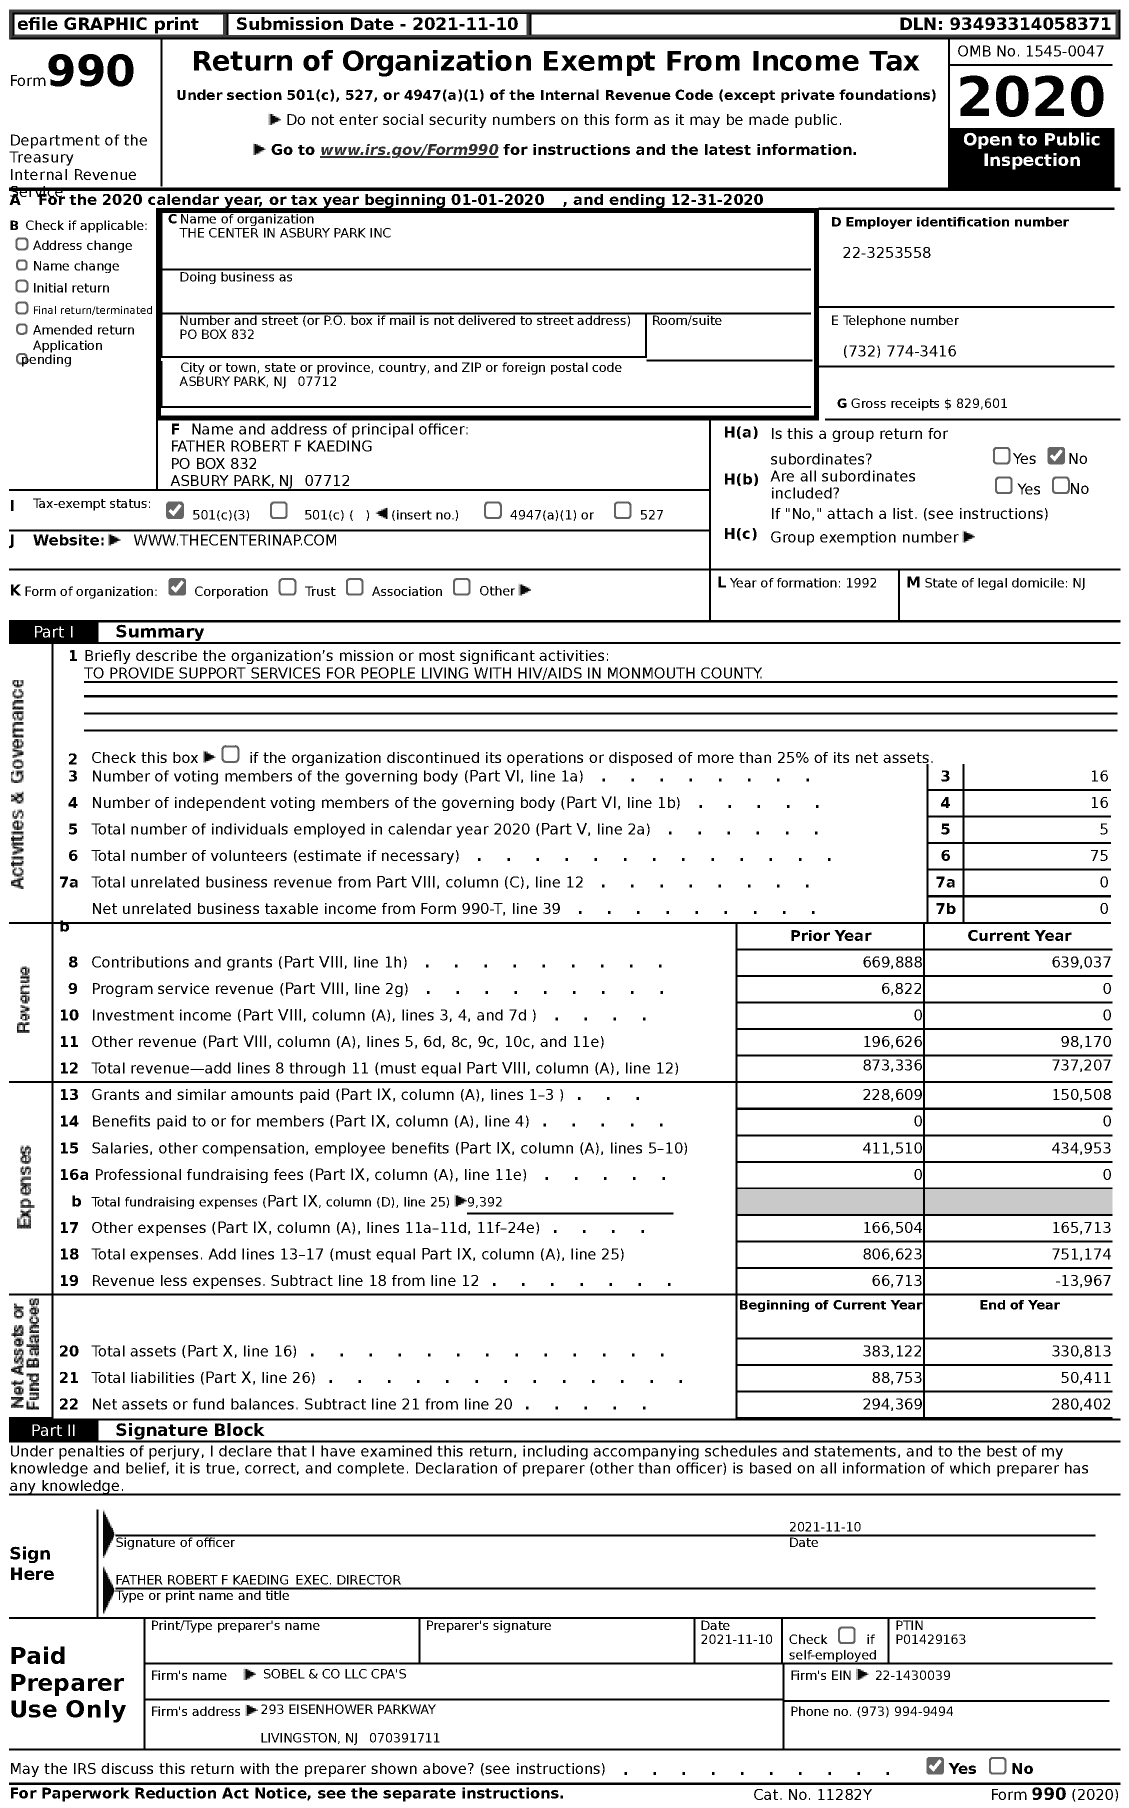 Image of first page of 2020 Form 990 for The Center in Asbury Park